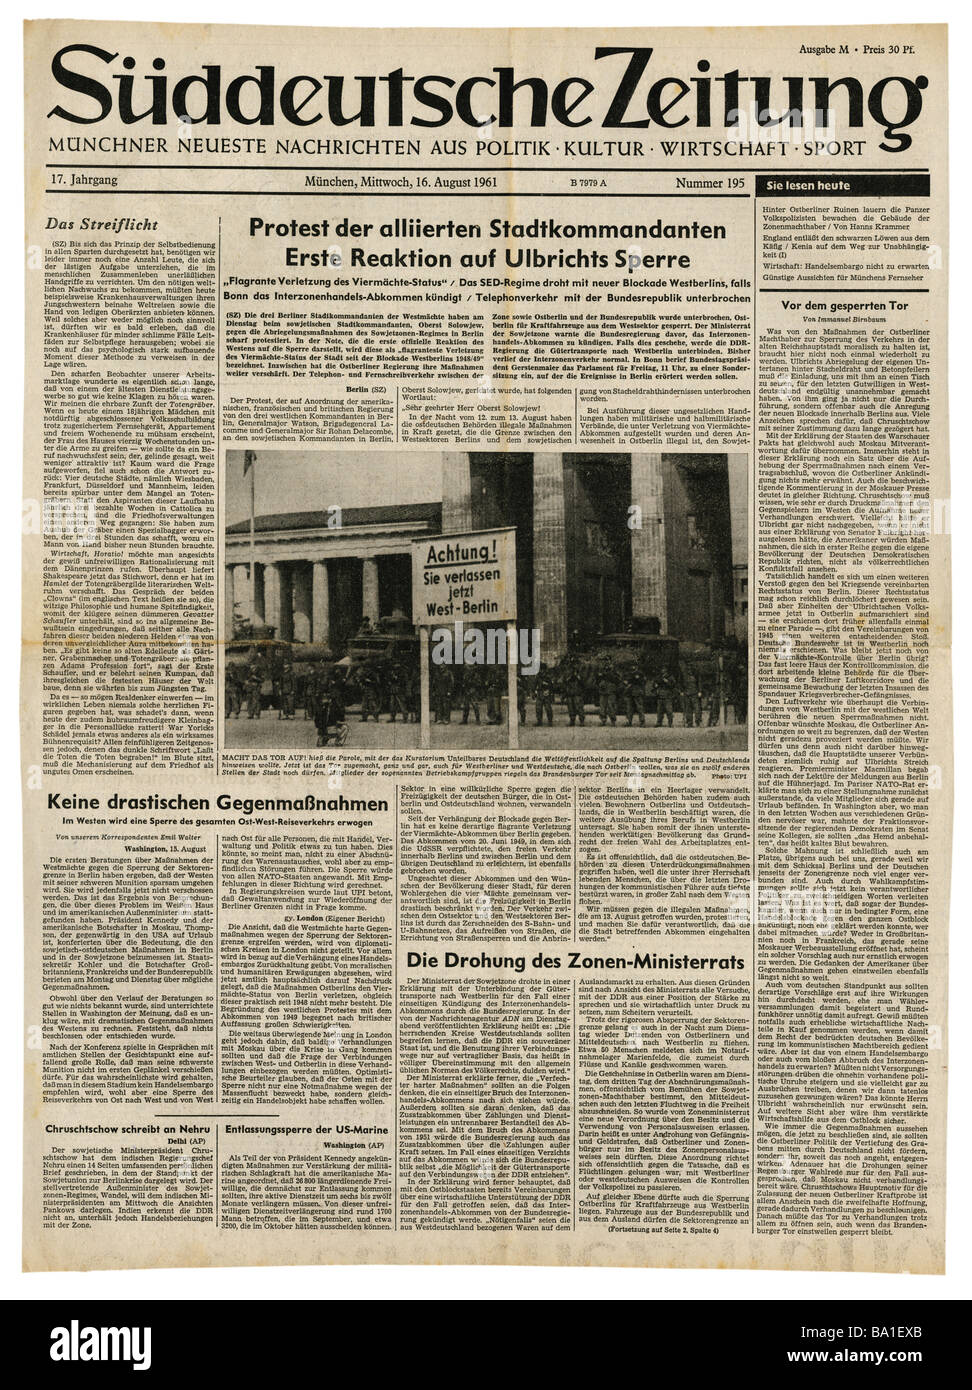 press/media, magazines, 'Süddeutsche Zeitung', Munich, 17 volume, number 195, Wednesday 16.8.1961, title, allied town majors protesting against building of Berlin wall, Stock Photo